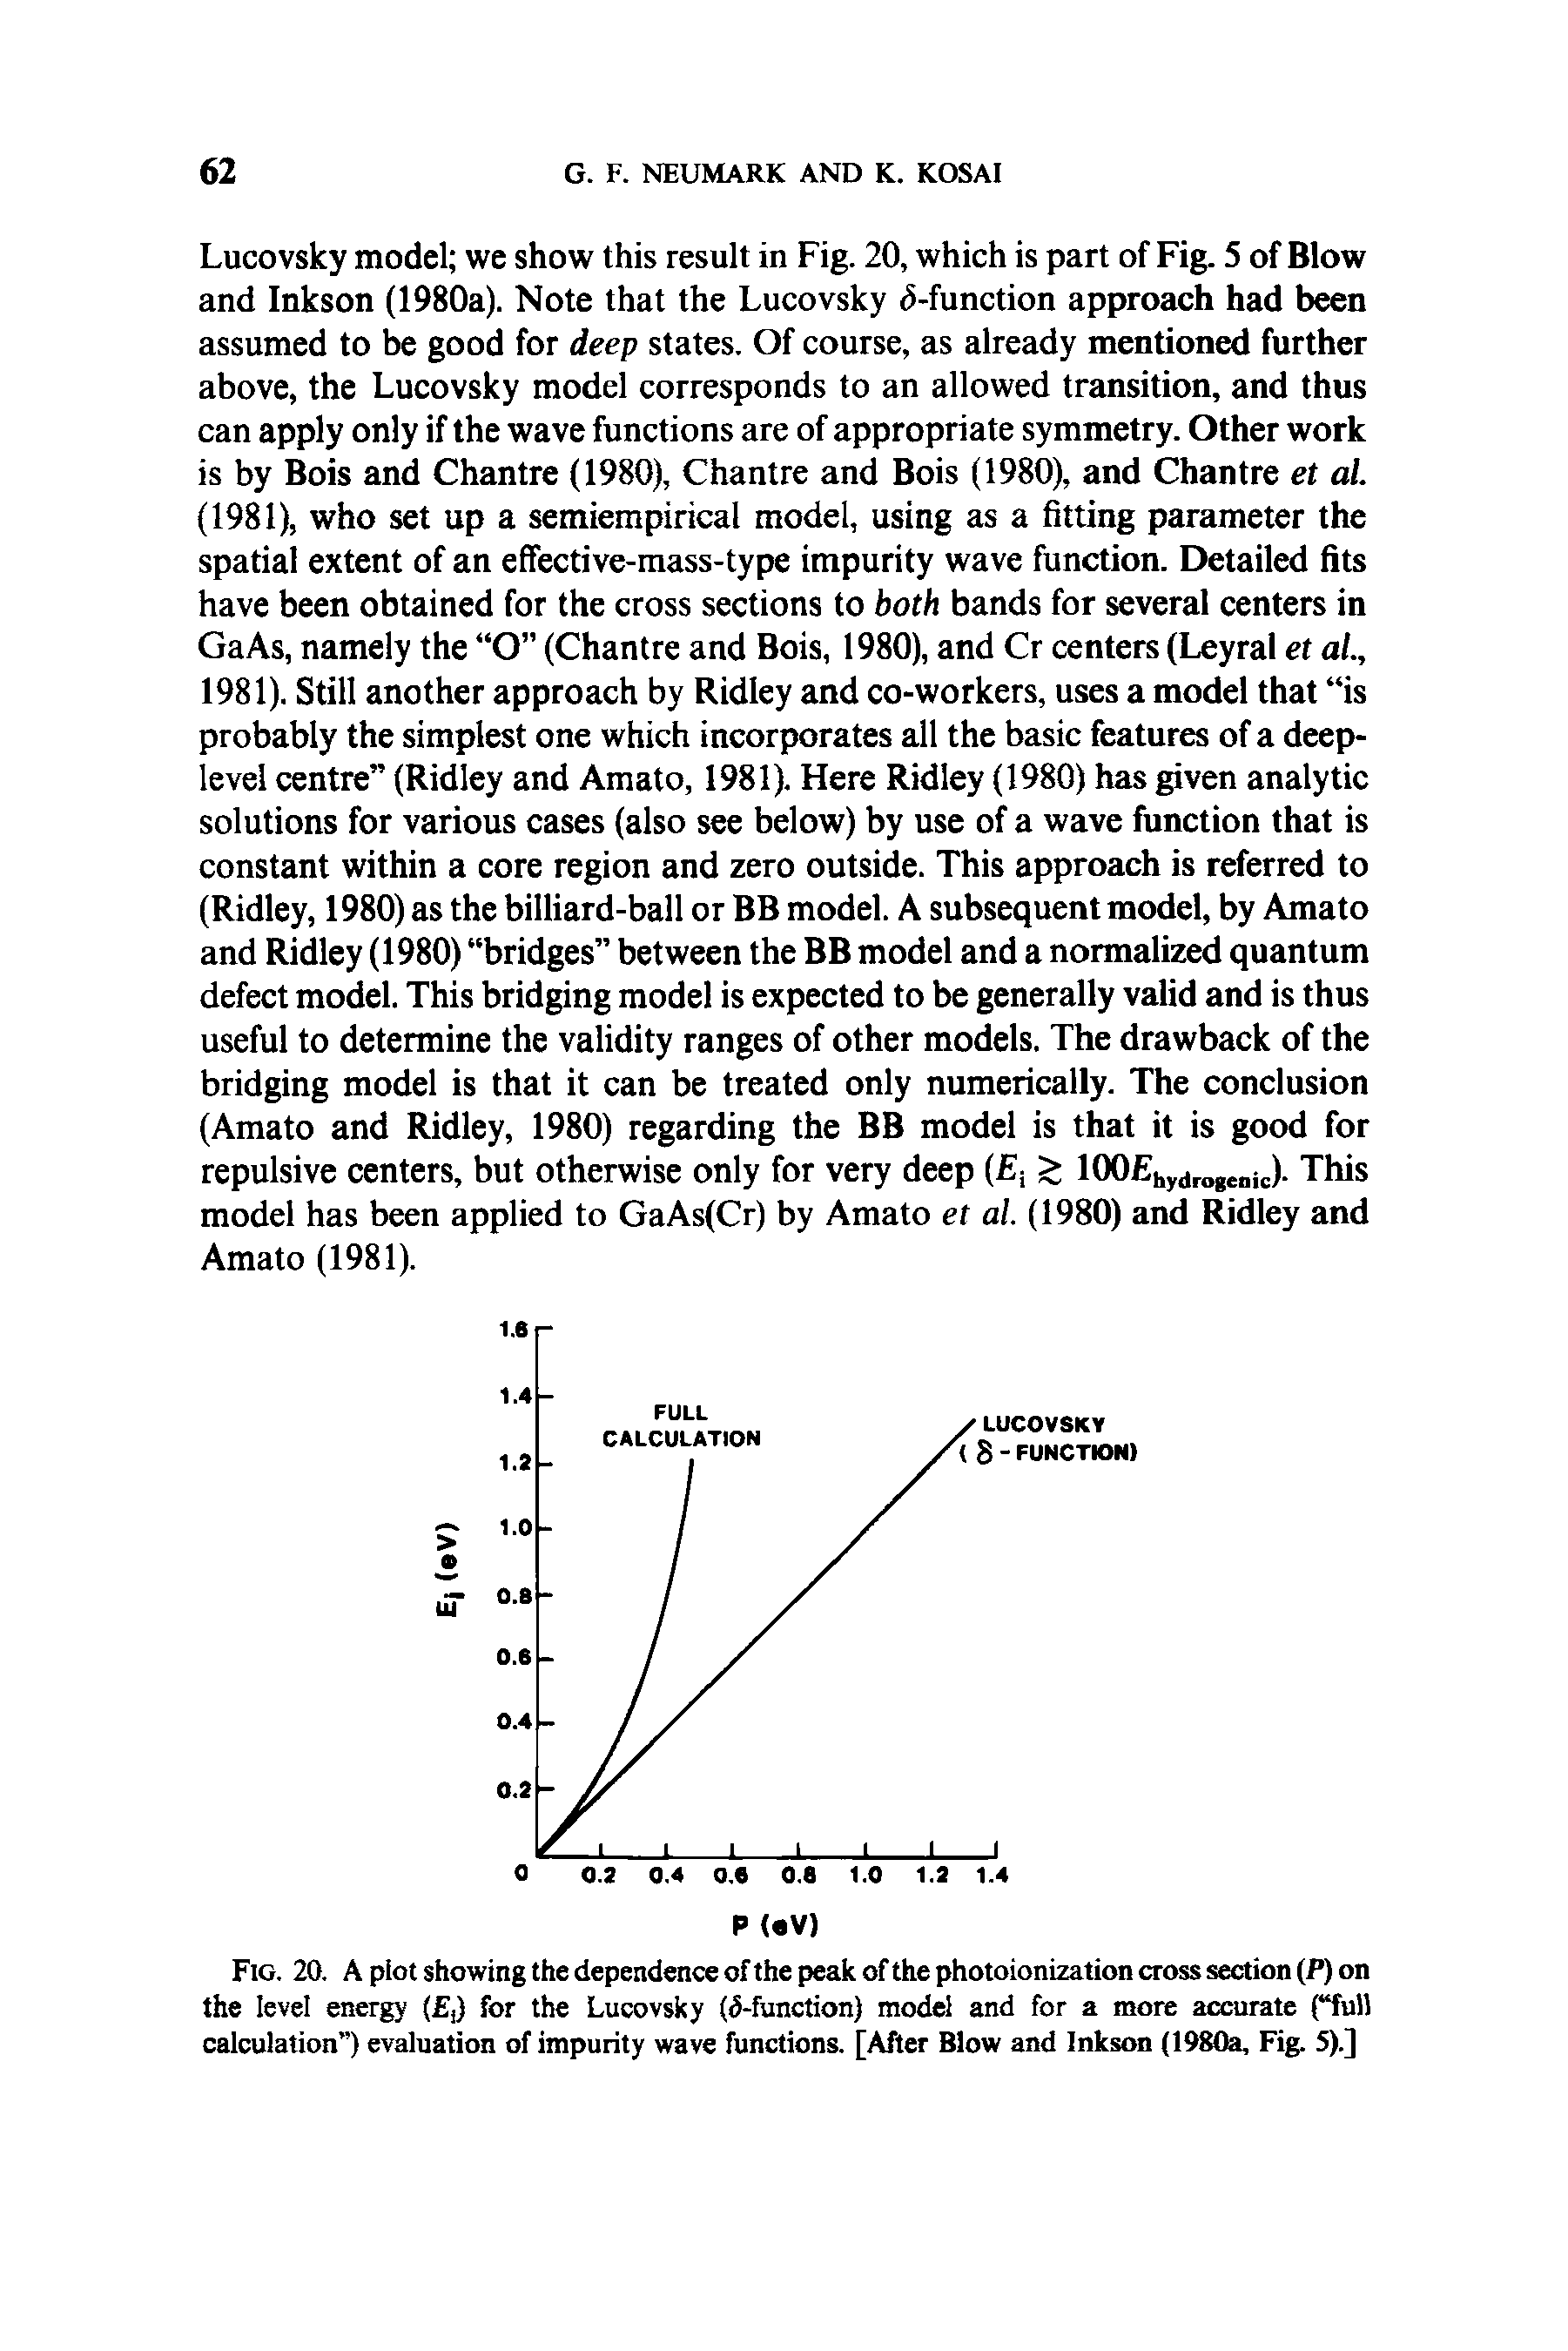 Fig. 20. A plot showing the dependence of the peak of the photoionization cross section (P) on the level energy ( ,) for the Lucovsky (5-function) model and for a more accurate ( full calculation") evaluation of impurity wave functions. [After Blow and Inkson (1980a, Fig. 5).]...